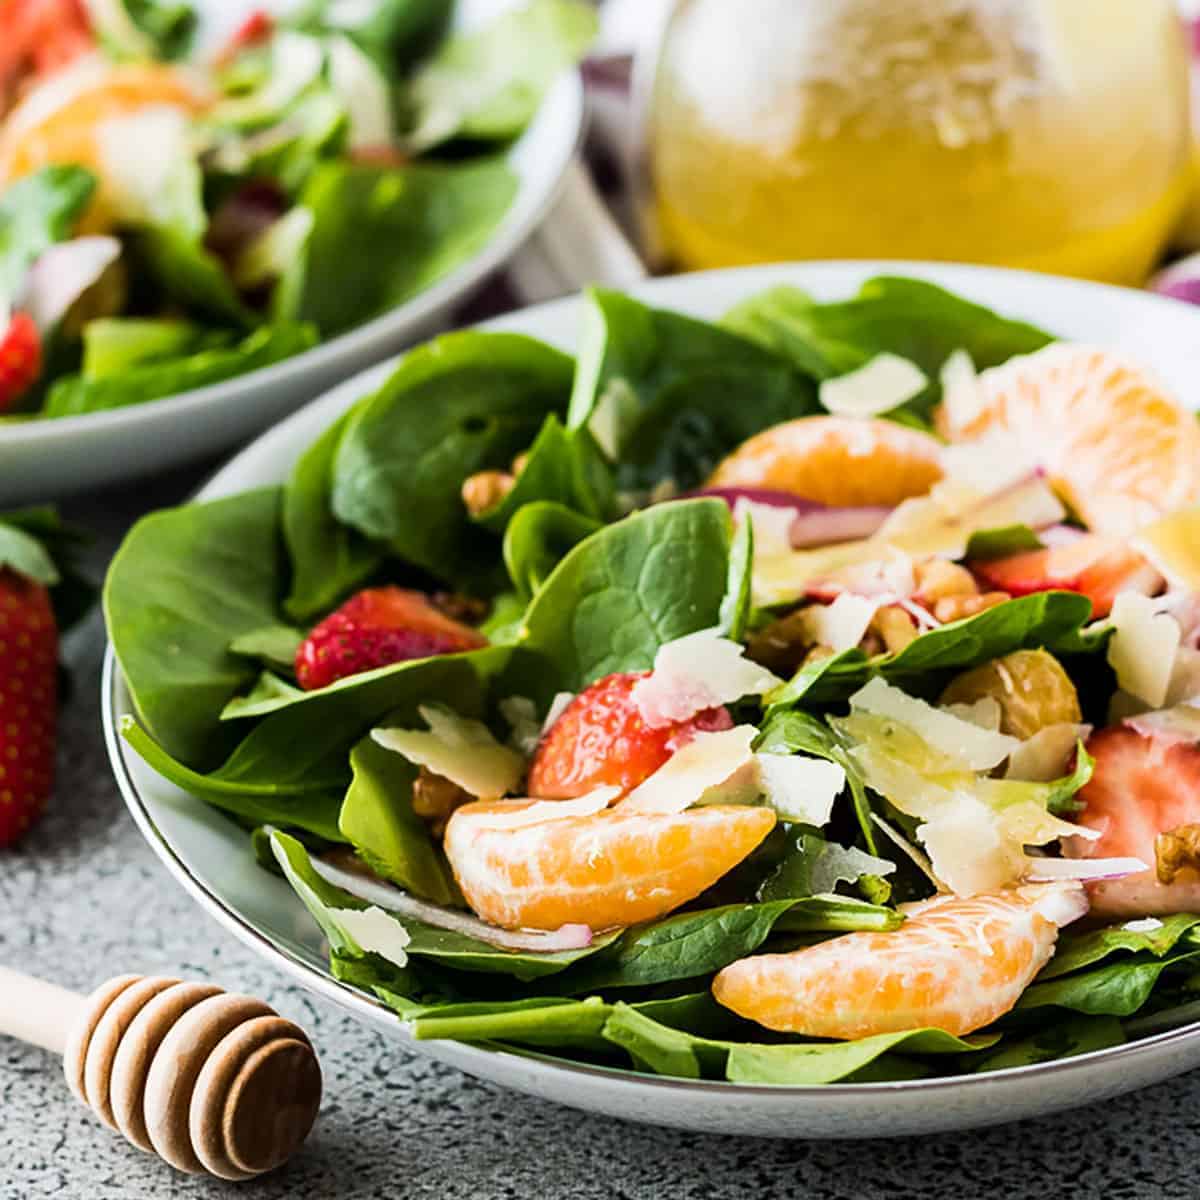 Bowl of spinach salad with strawberries and orange slices.